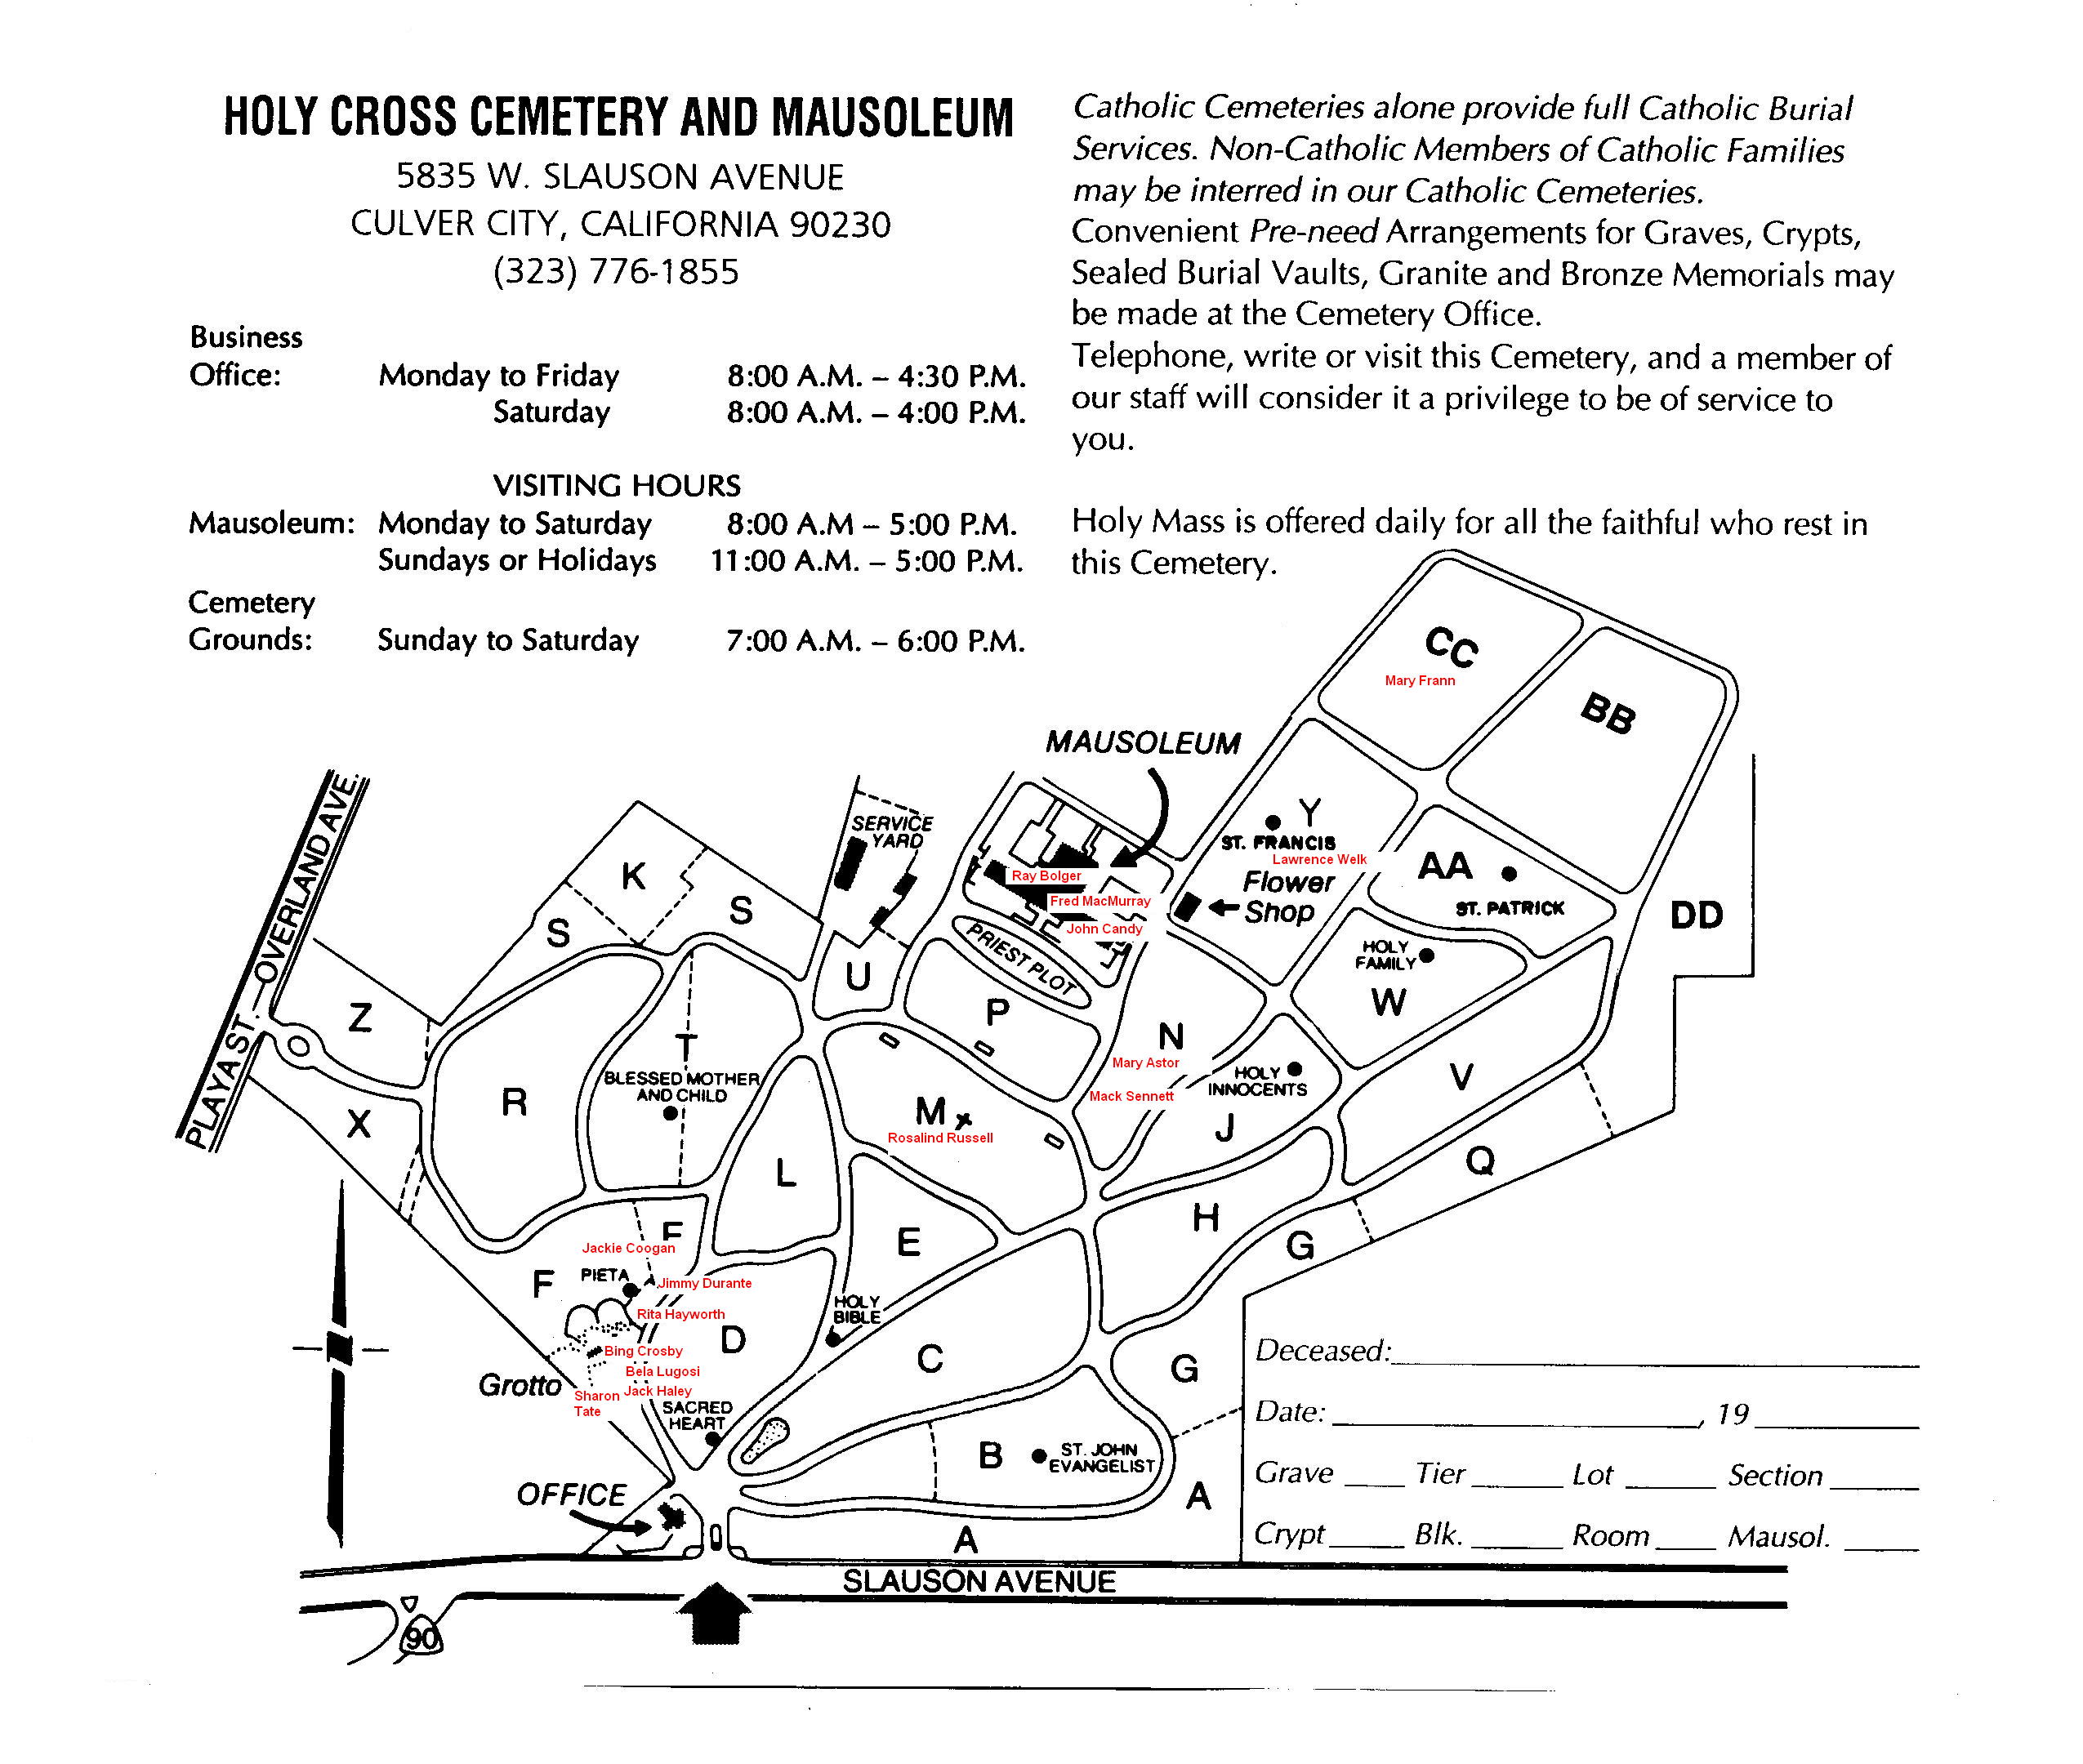 Map of Holy Cross Cemetery in Culver City California.